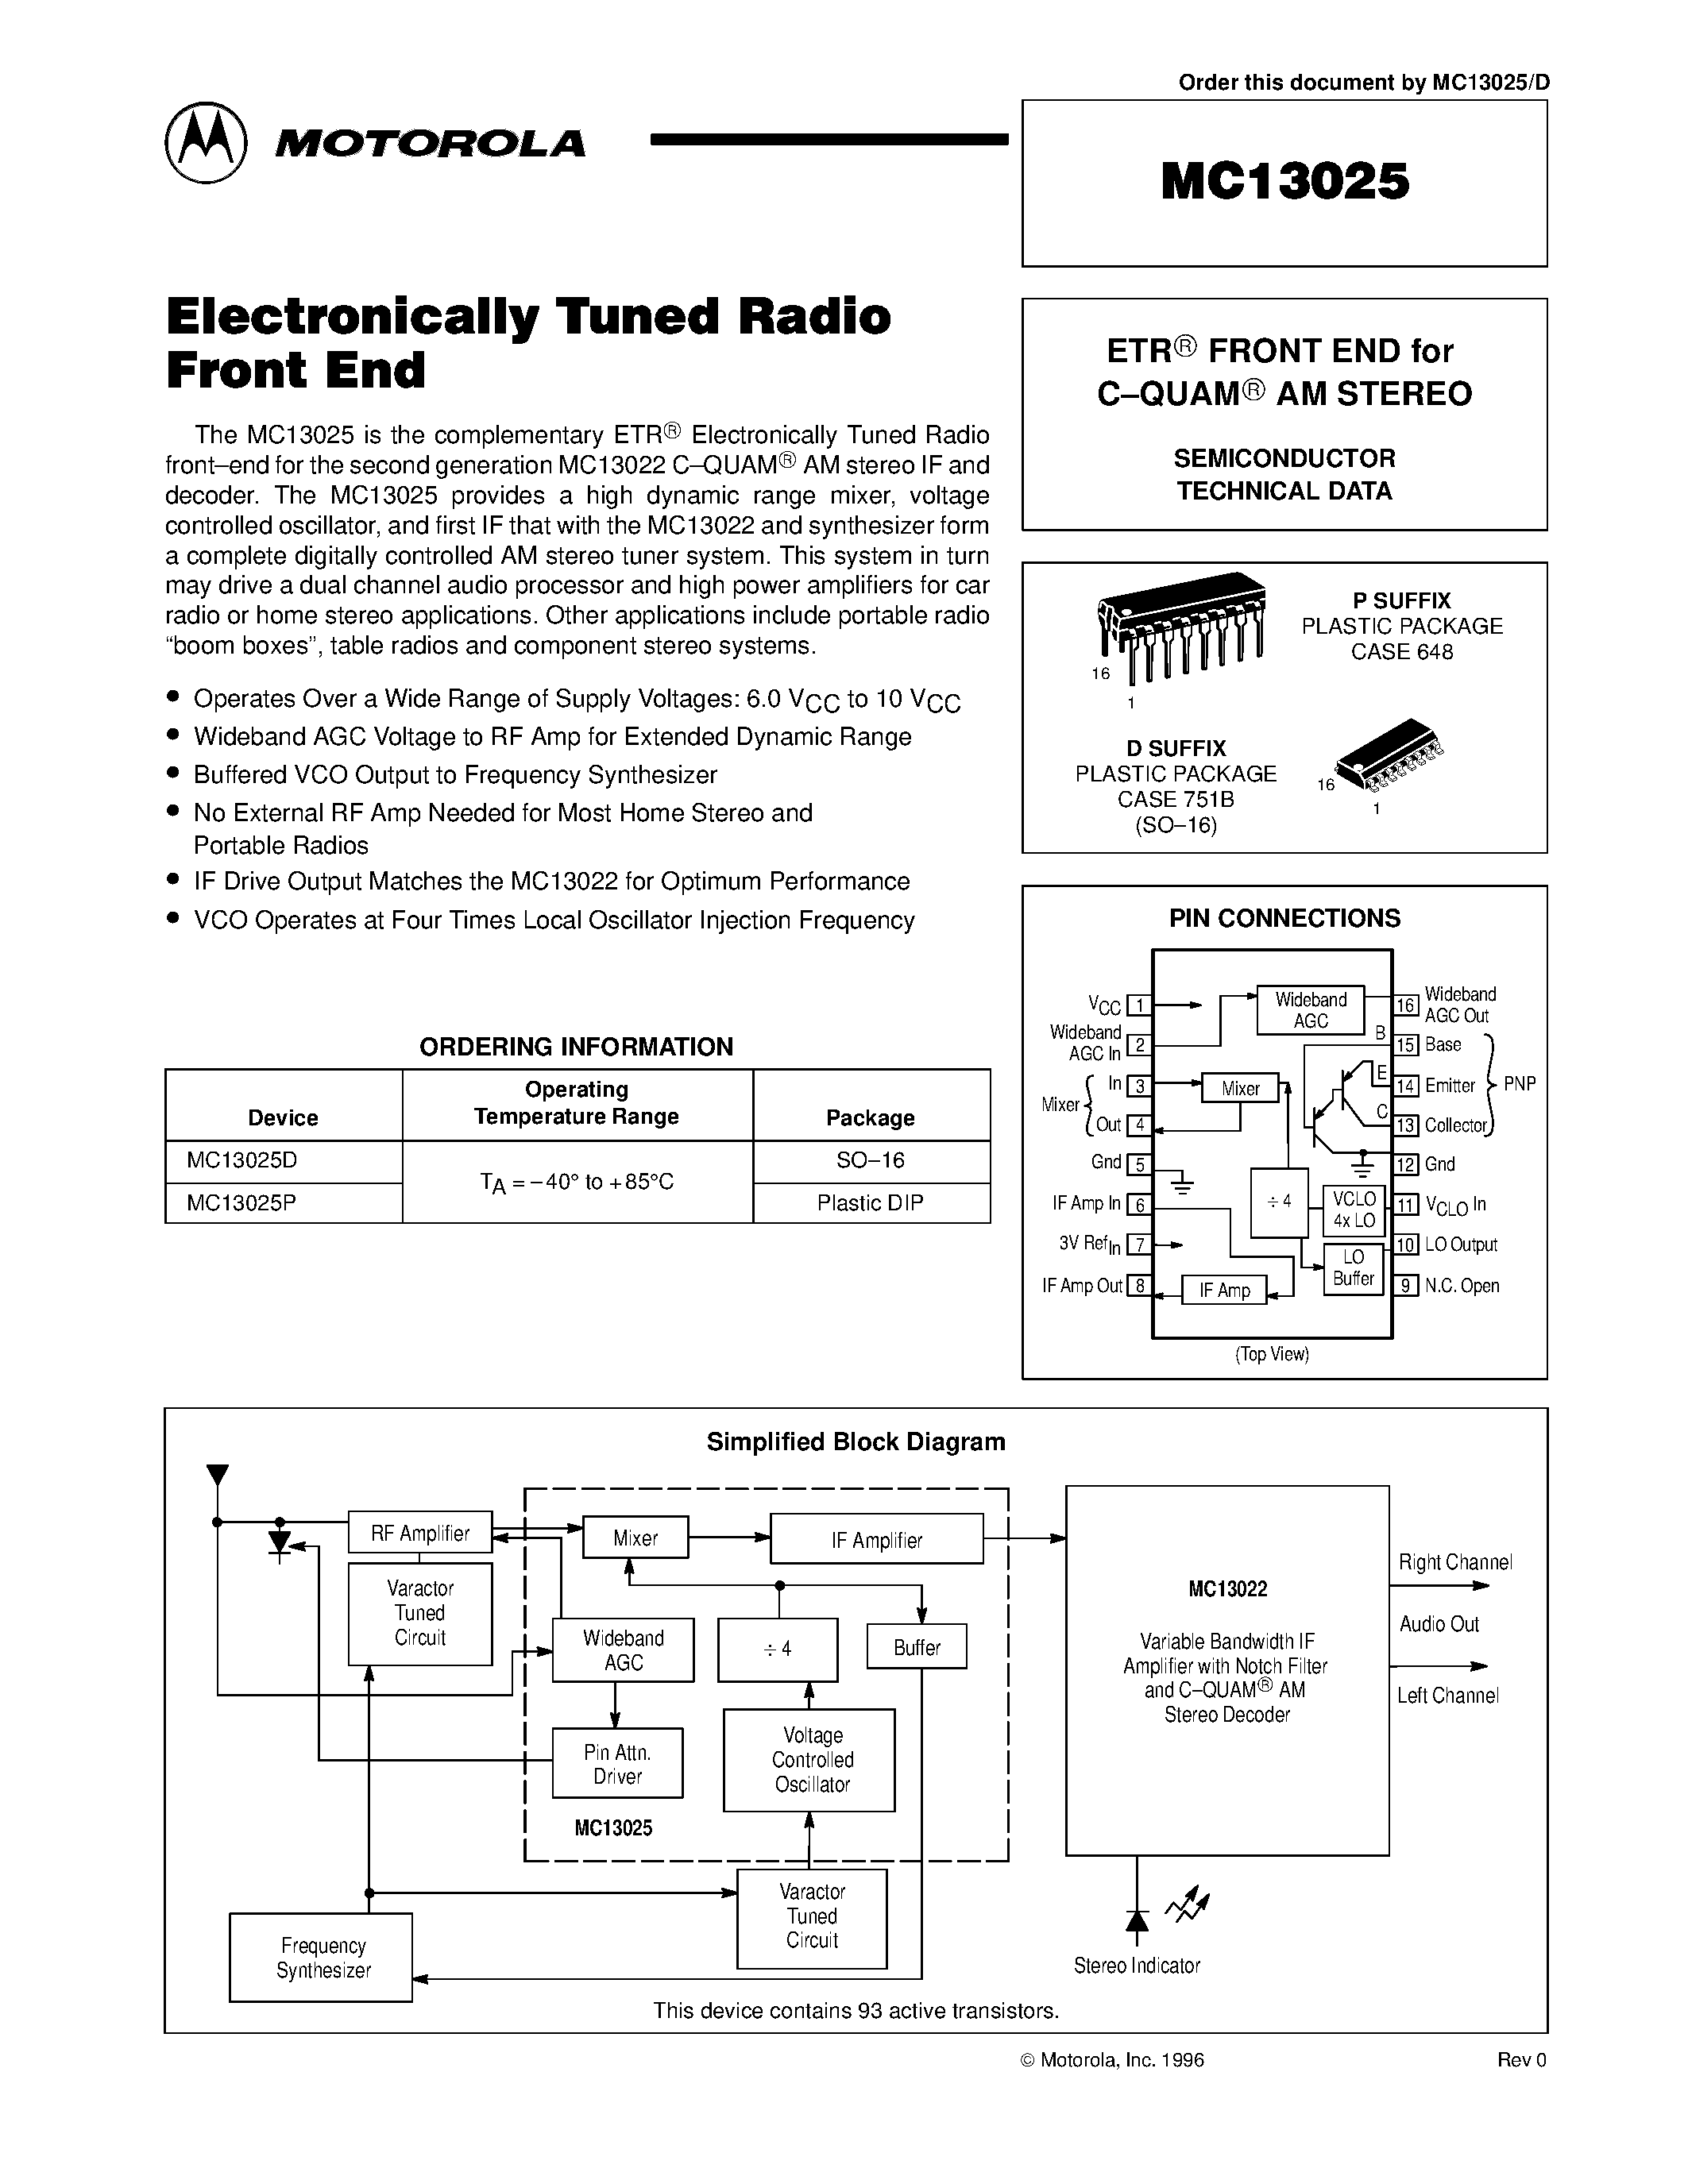 Datasheet MC13025P - Electronically Tuned Radio Front End page 1